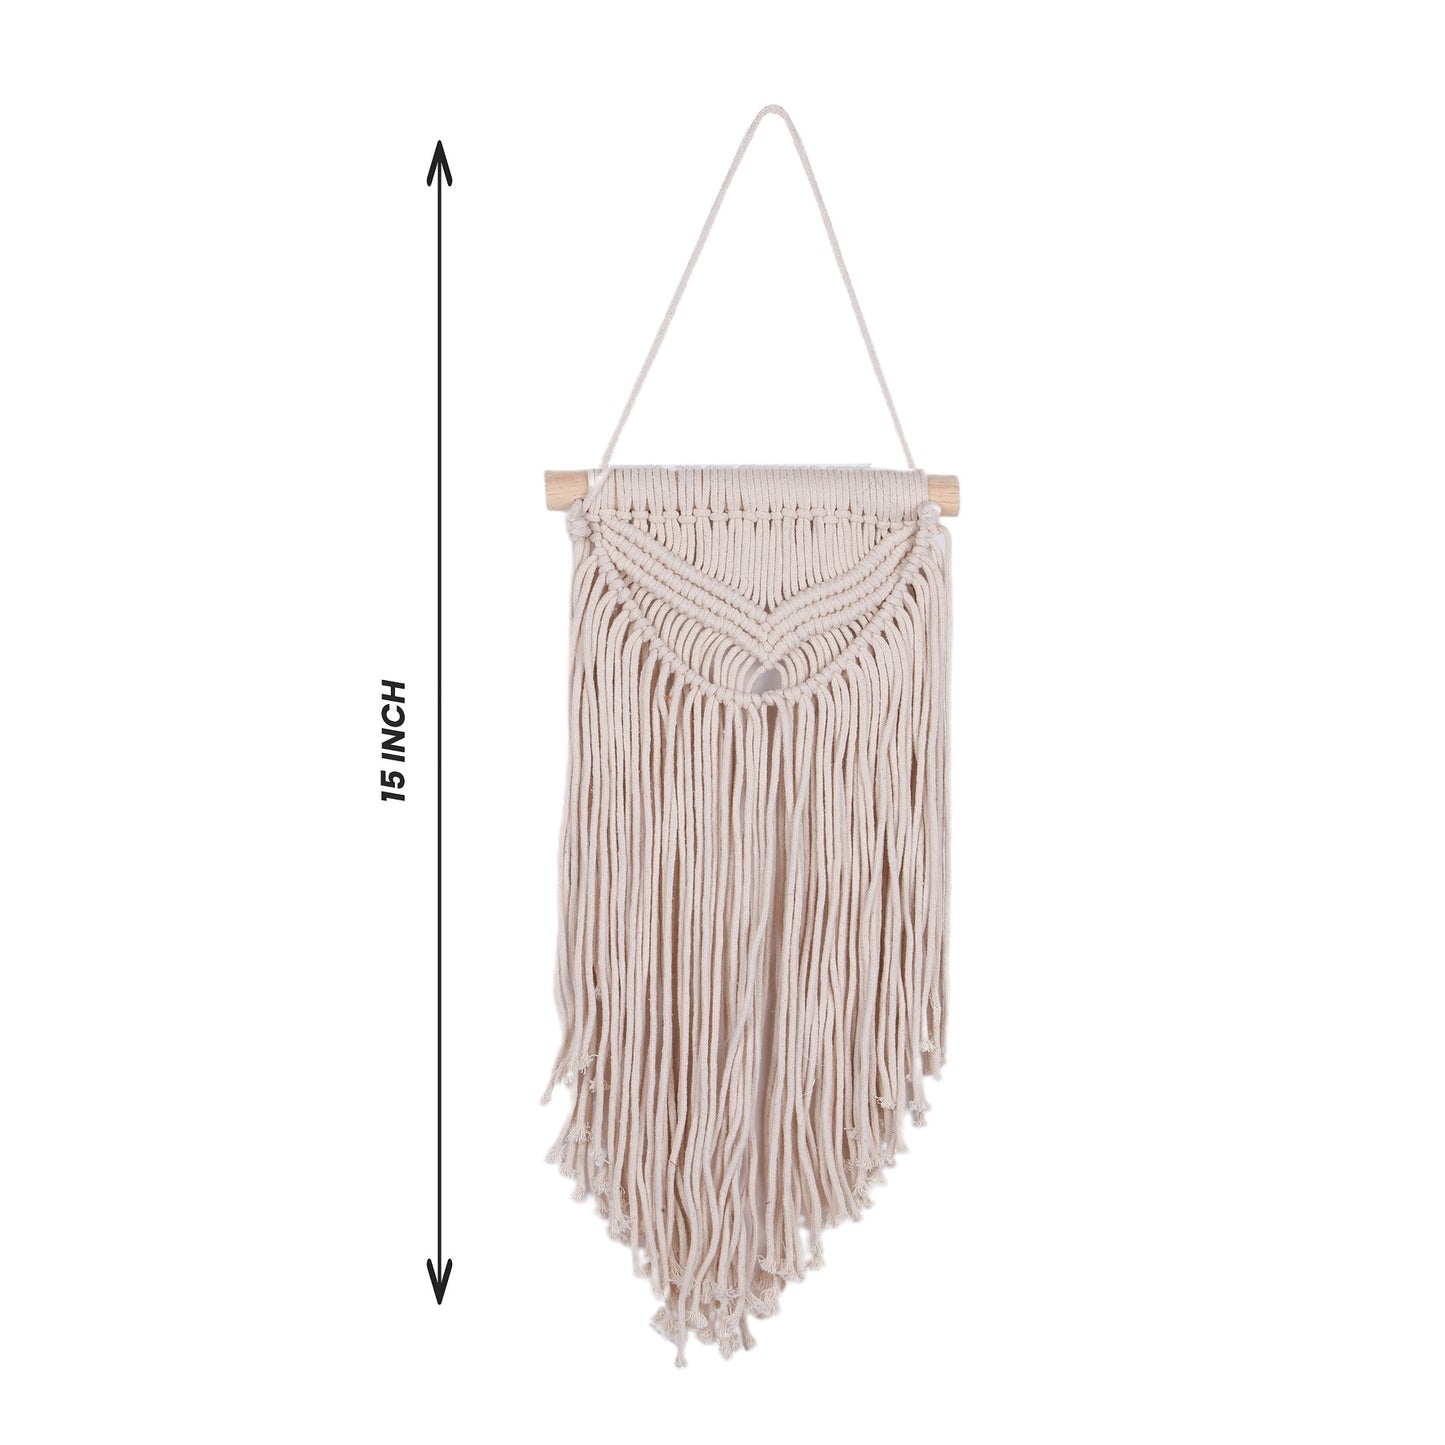 Macrame Wall Hanging Decor | Handmade Boho Wall Décor | Wall Hanging for Living Room & Bed Room_ Beige